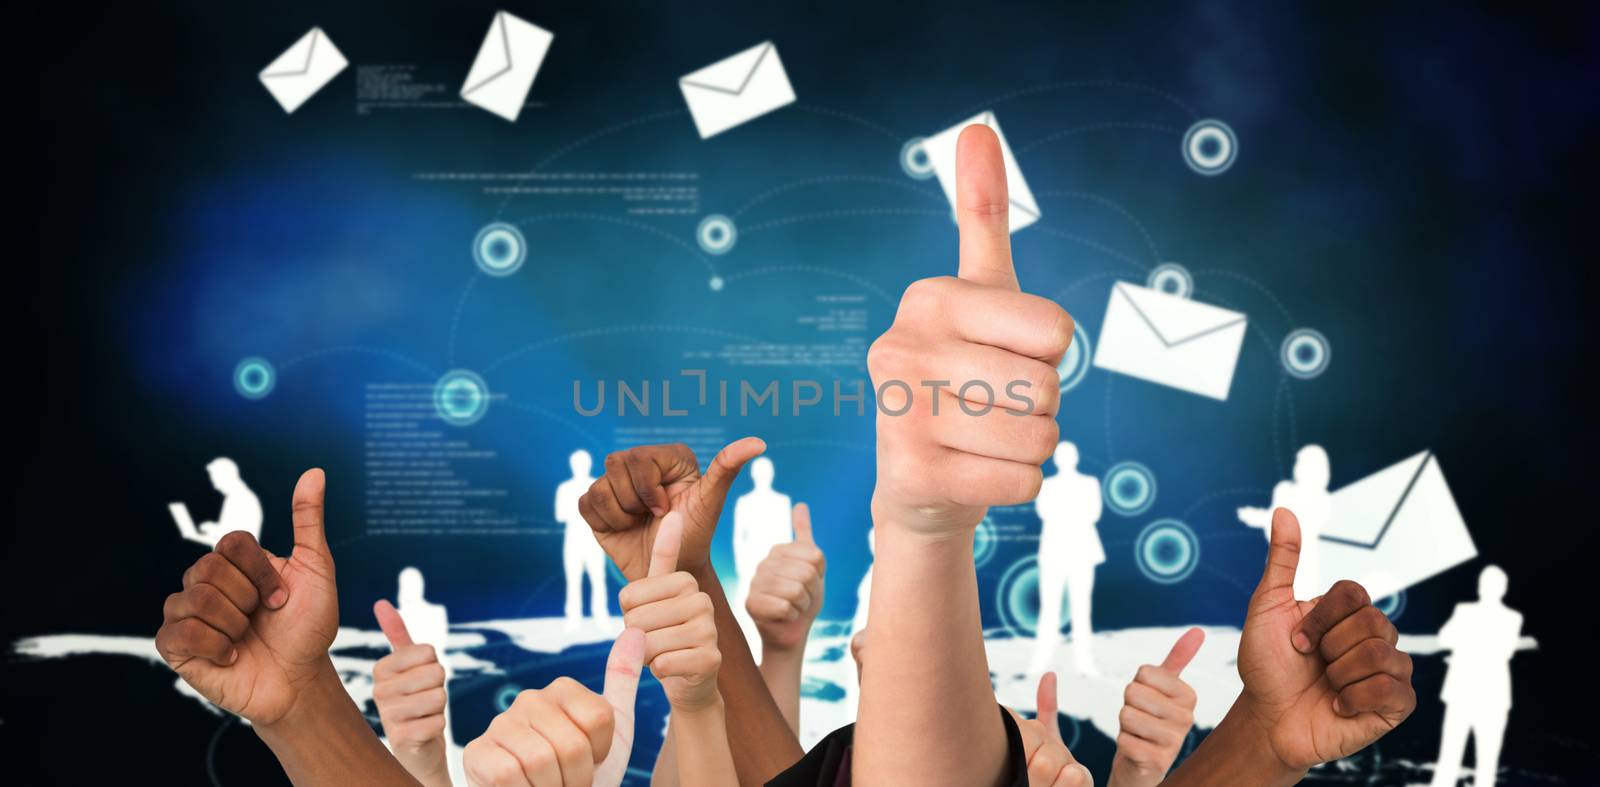 Composite image of hands showing thumbs up by Wavebreakmedia